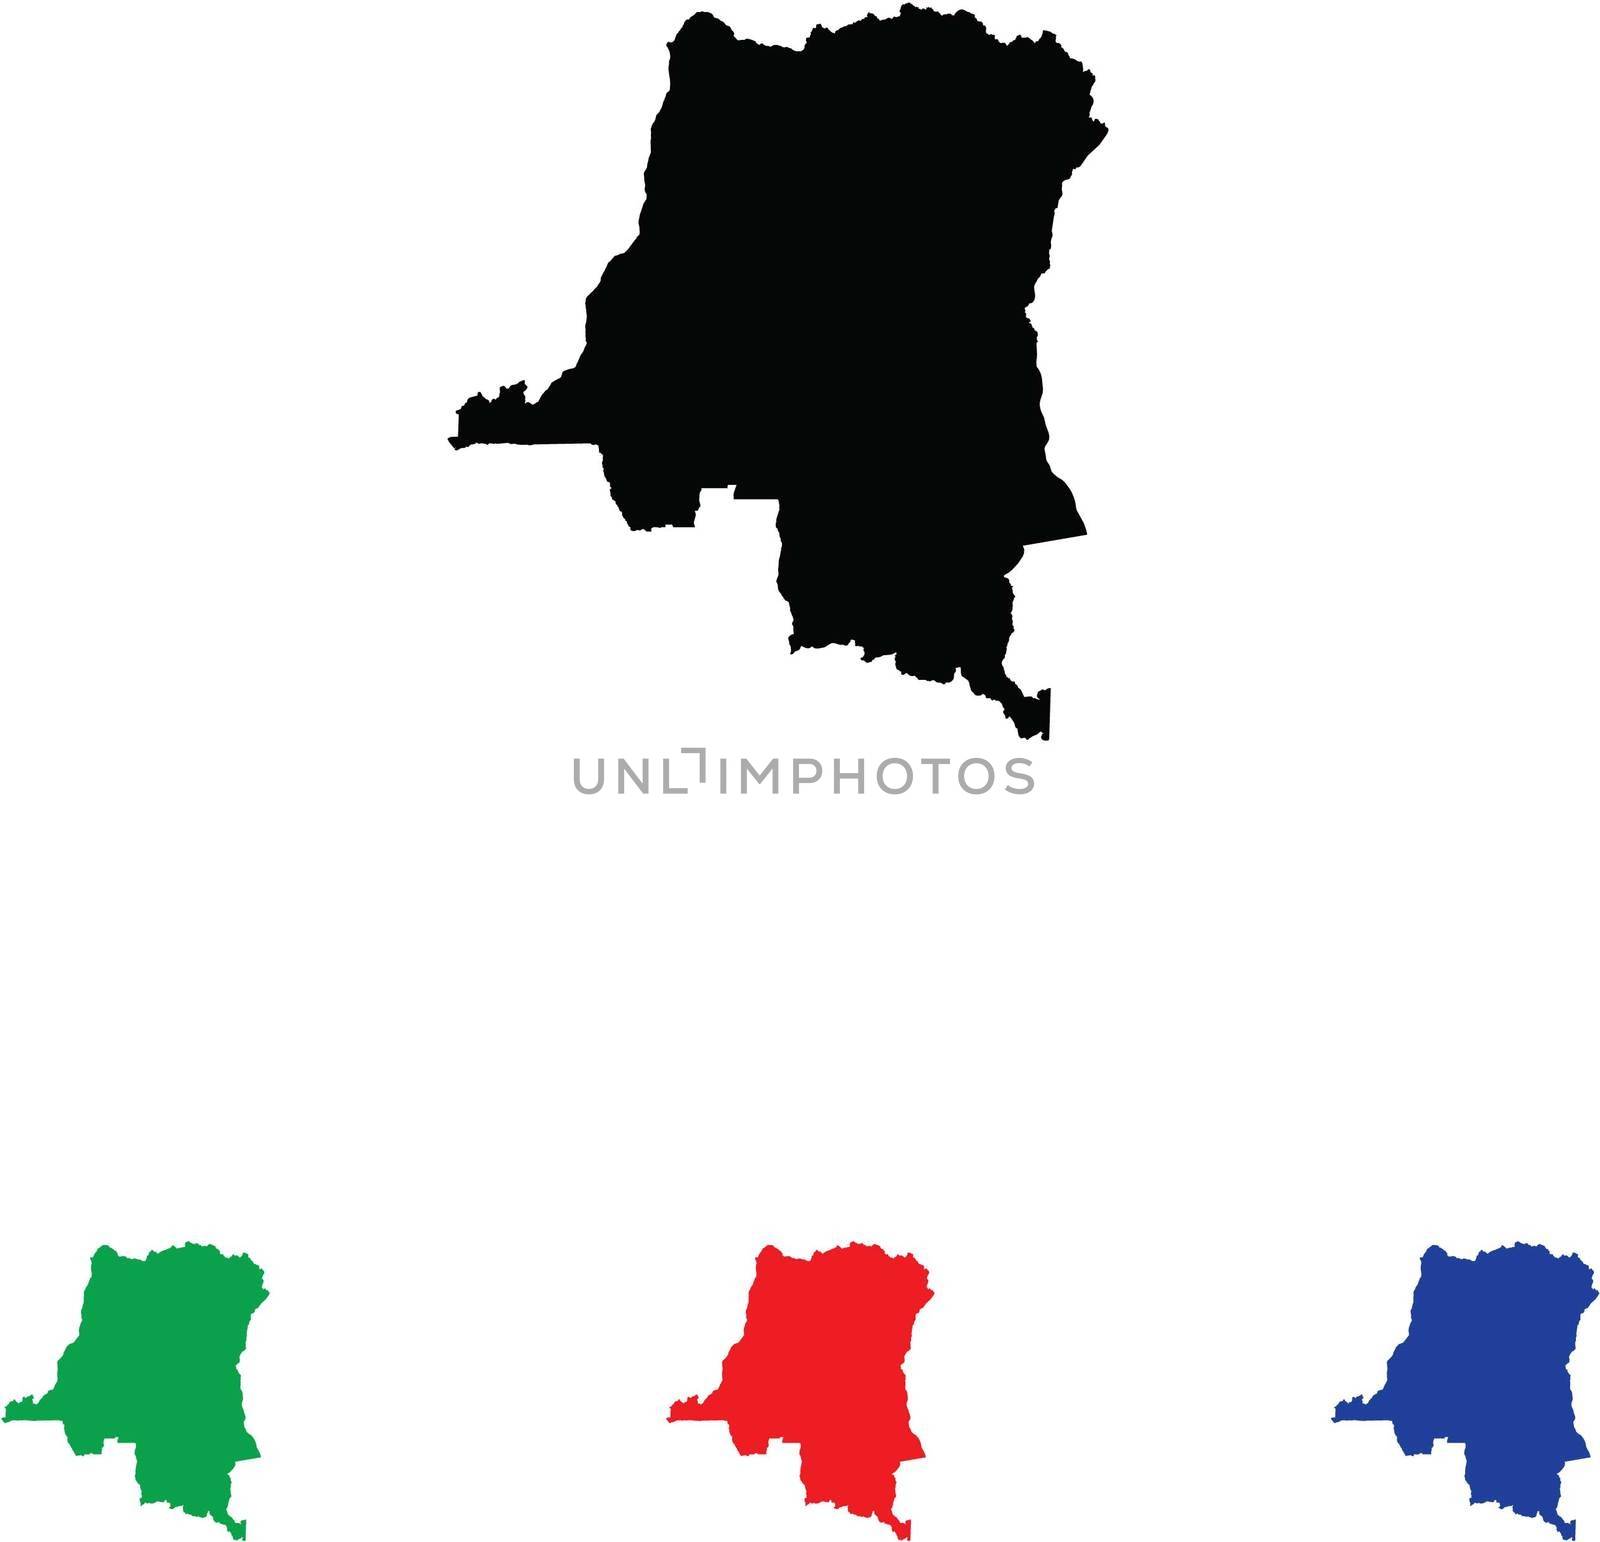 Democratic Republic of Congo Icon Illustration with Four Color Variations